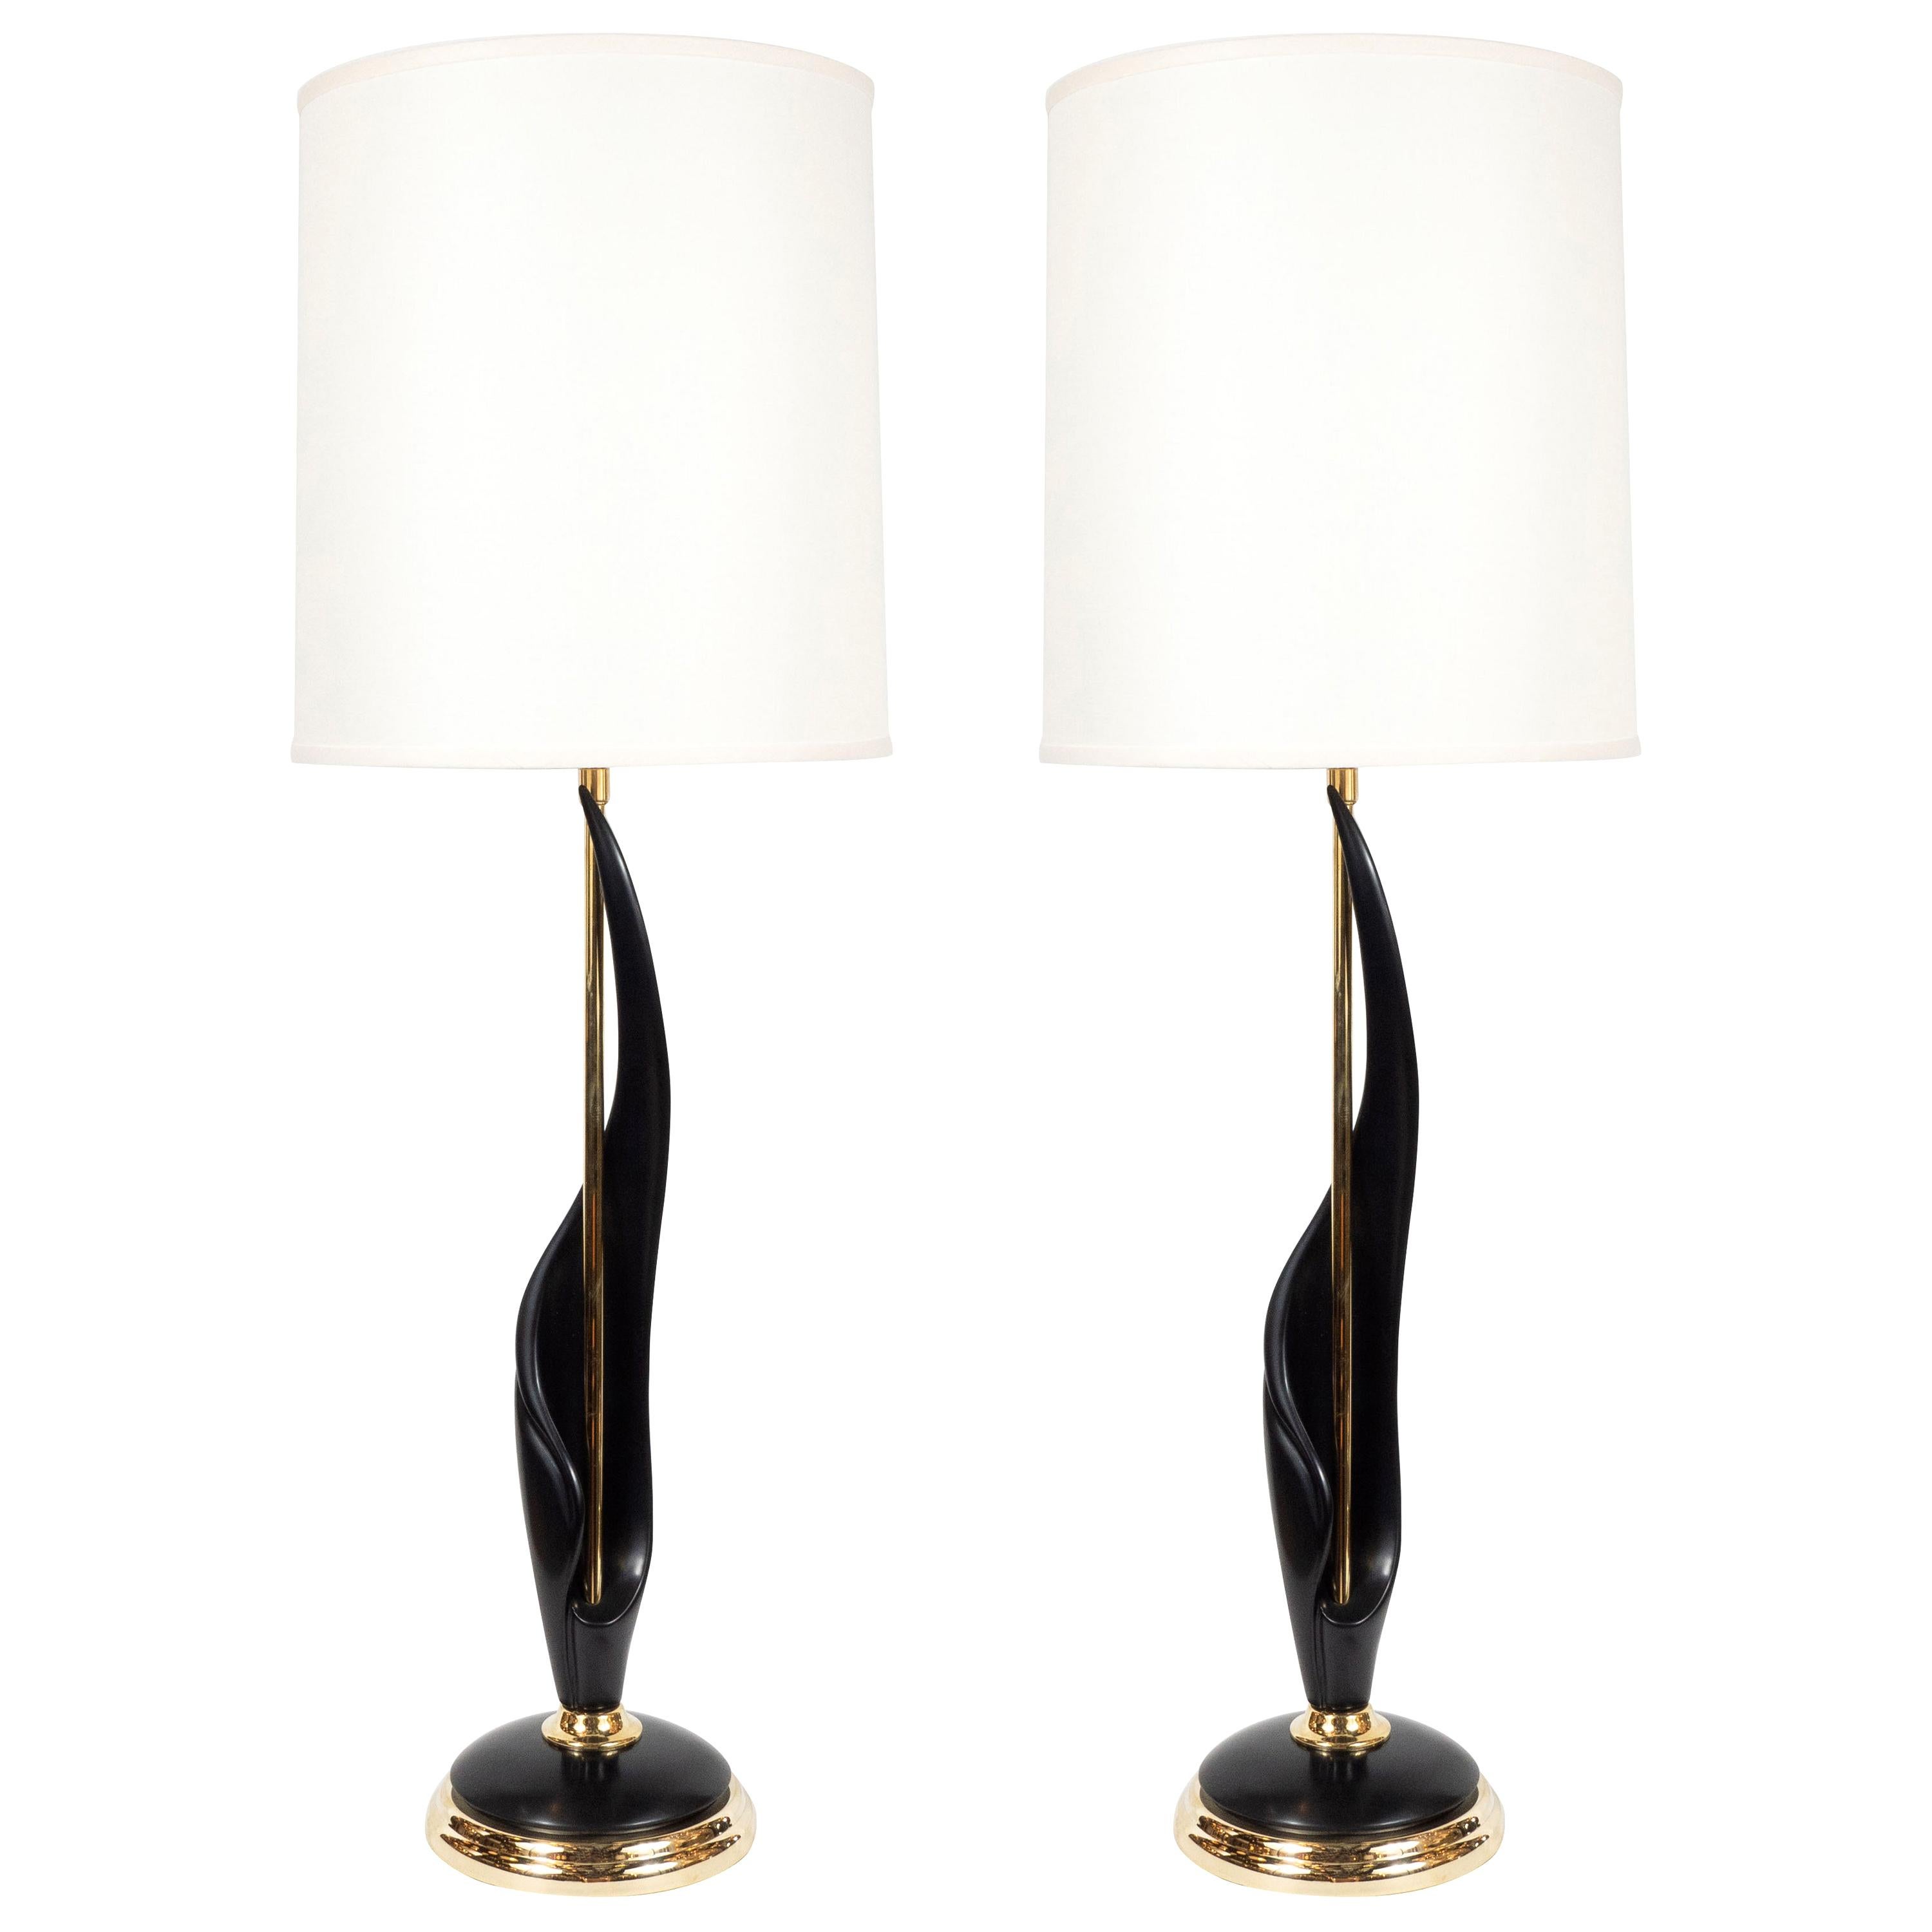 Pair of Mid-Century Modern Spiral Form Ebonized Walnut and Brass Table Lamps